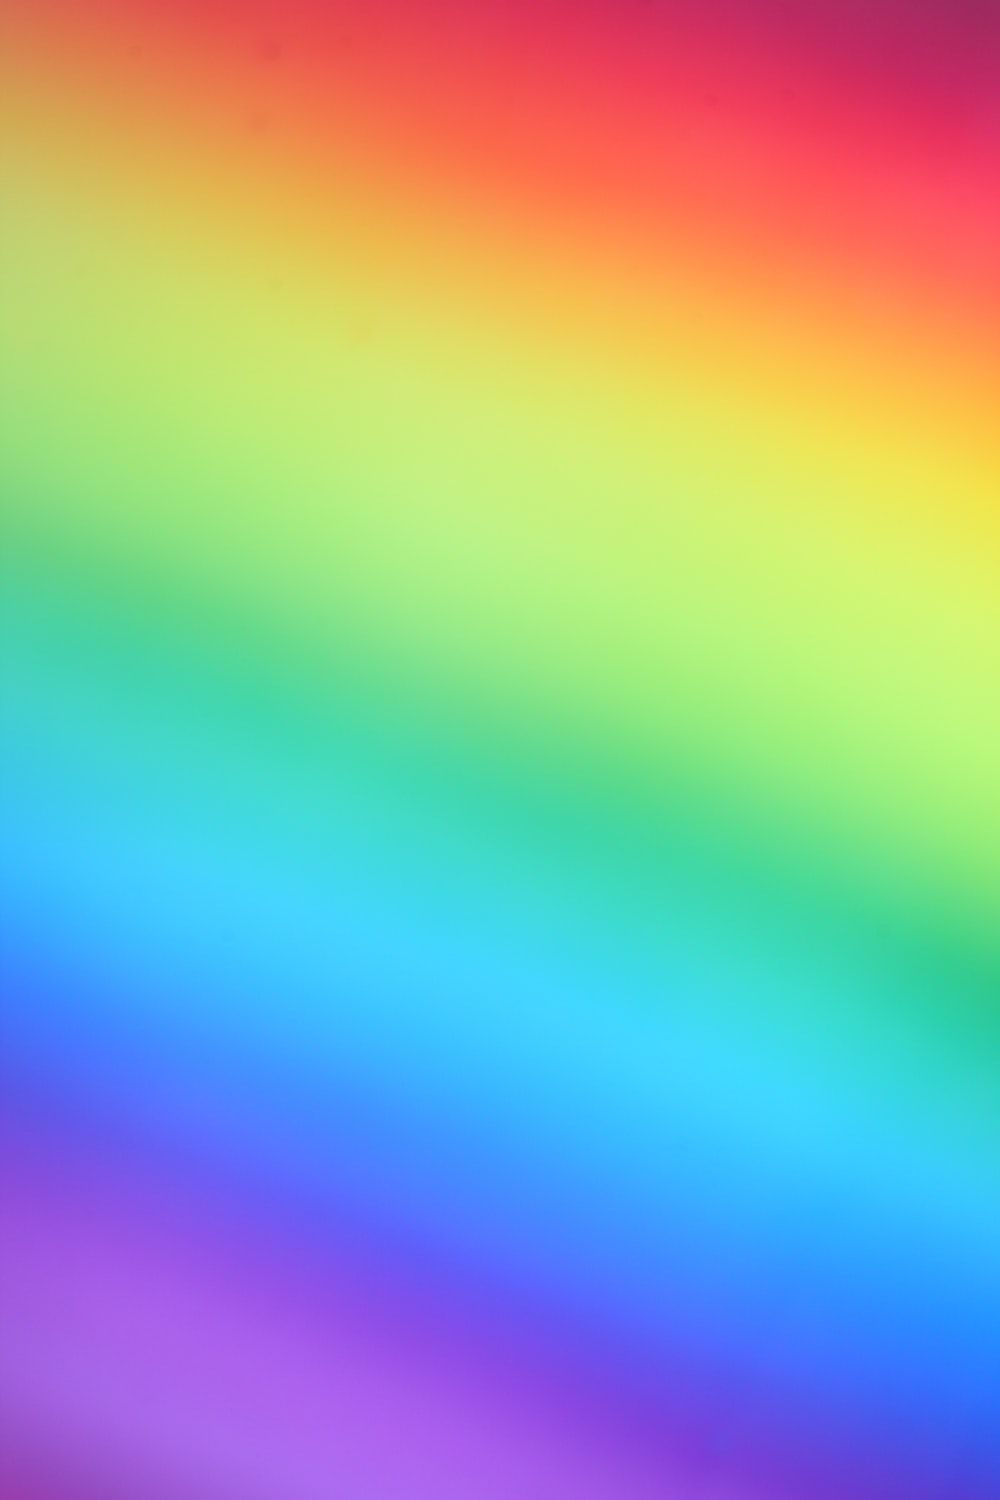 Rainbow Flag Picture. Download Free Image